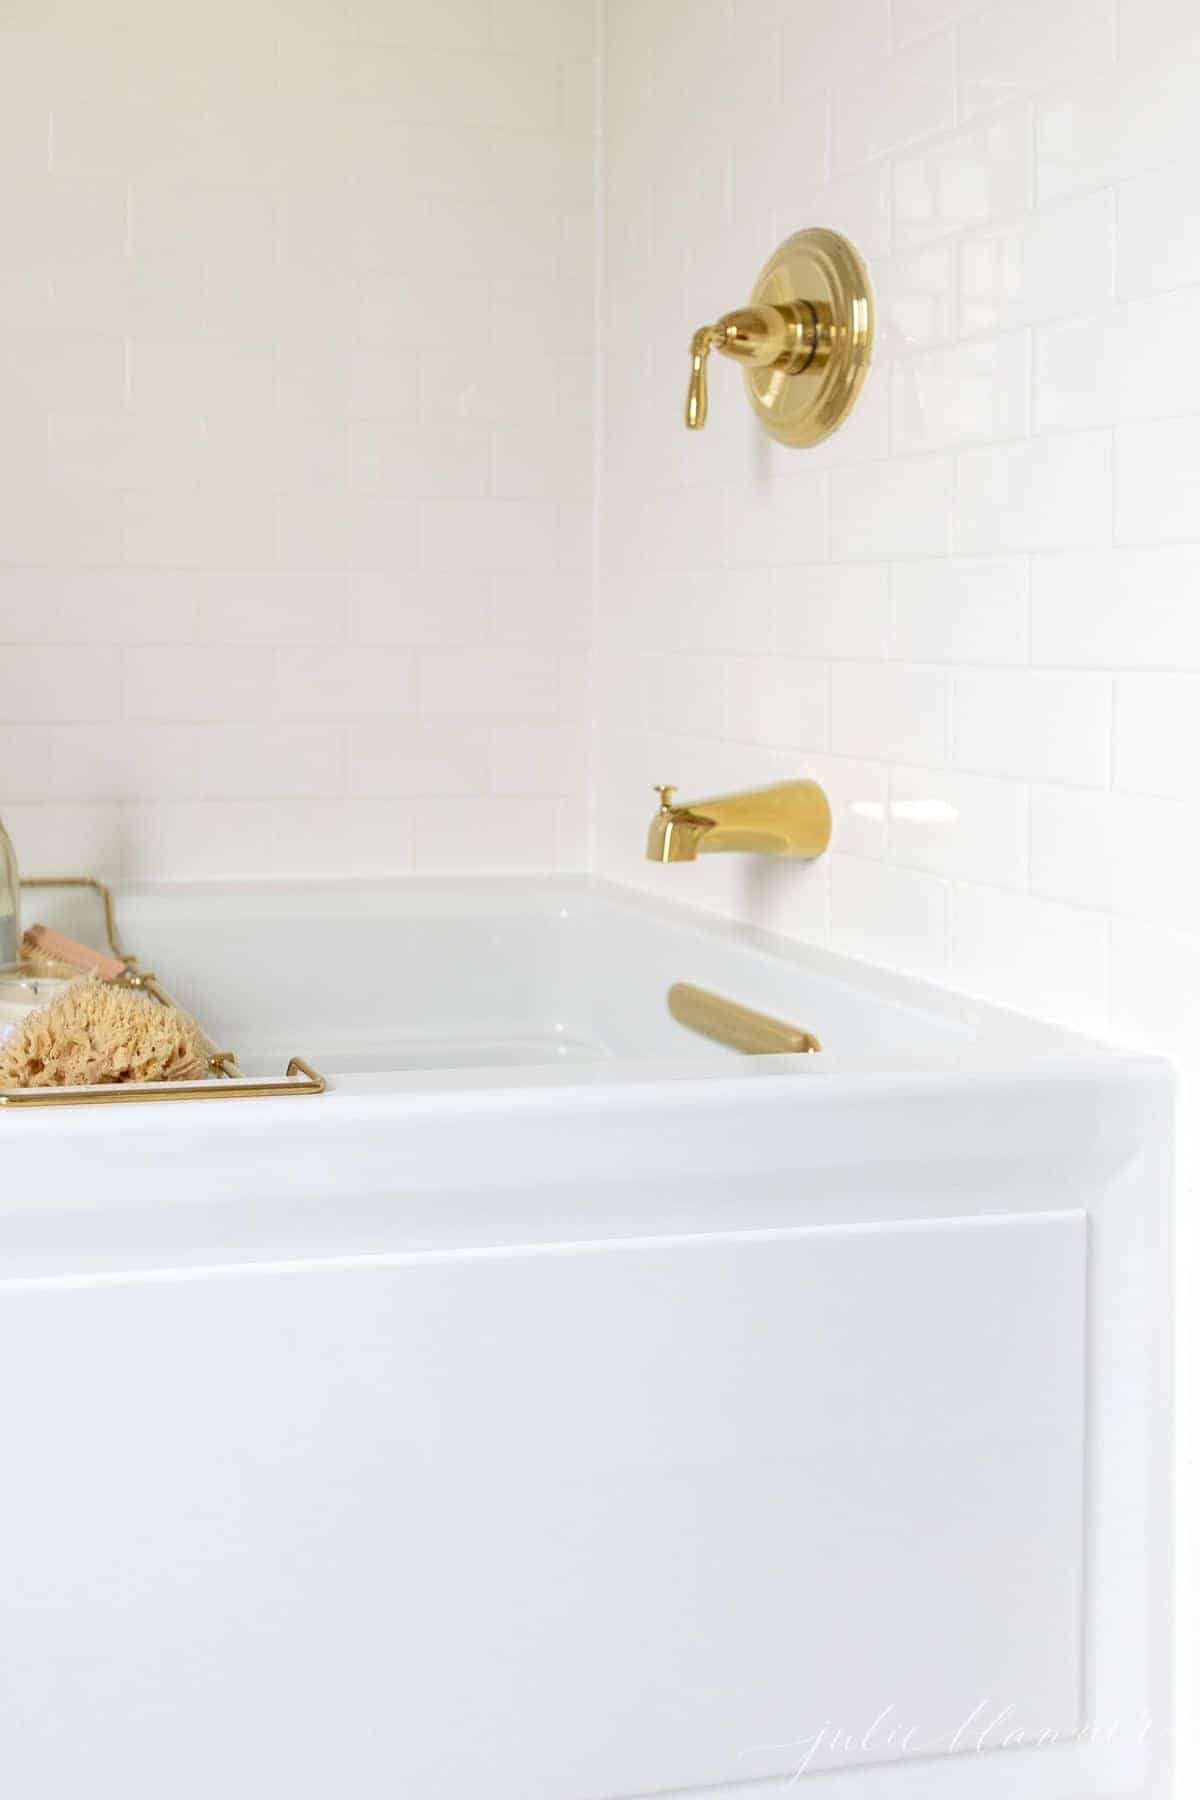 A brass bath tray with various items like a candle, champagne, sponge, and a wash cloth to make the ultimate bath experience. 